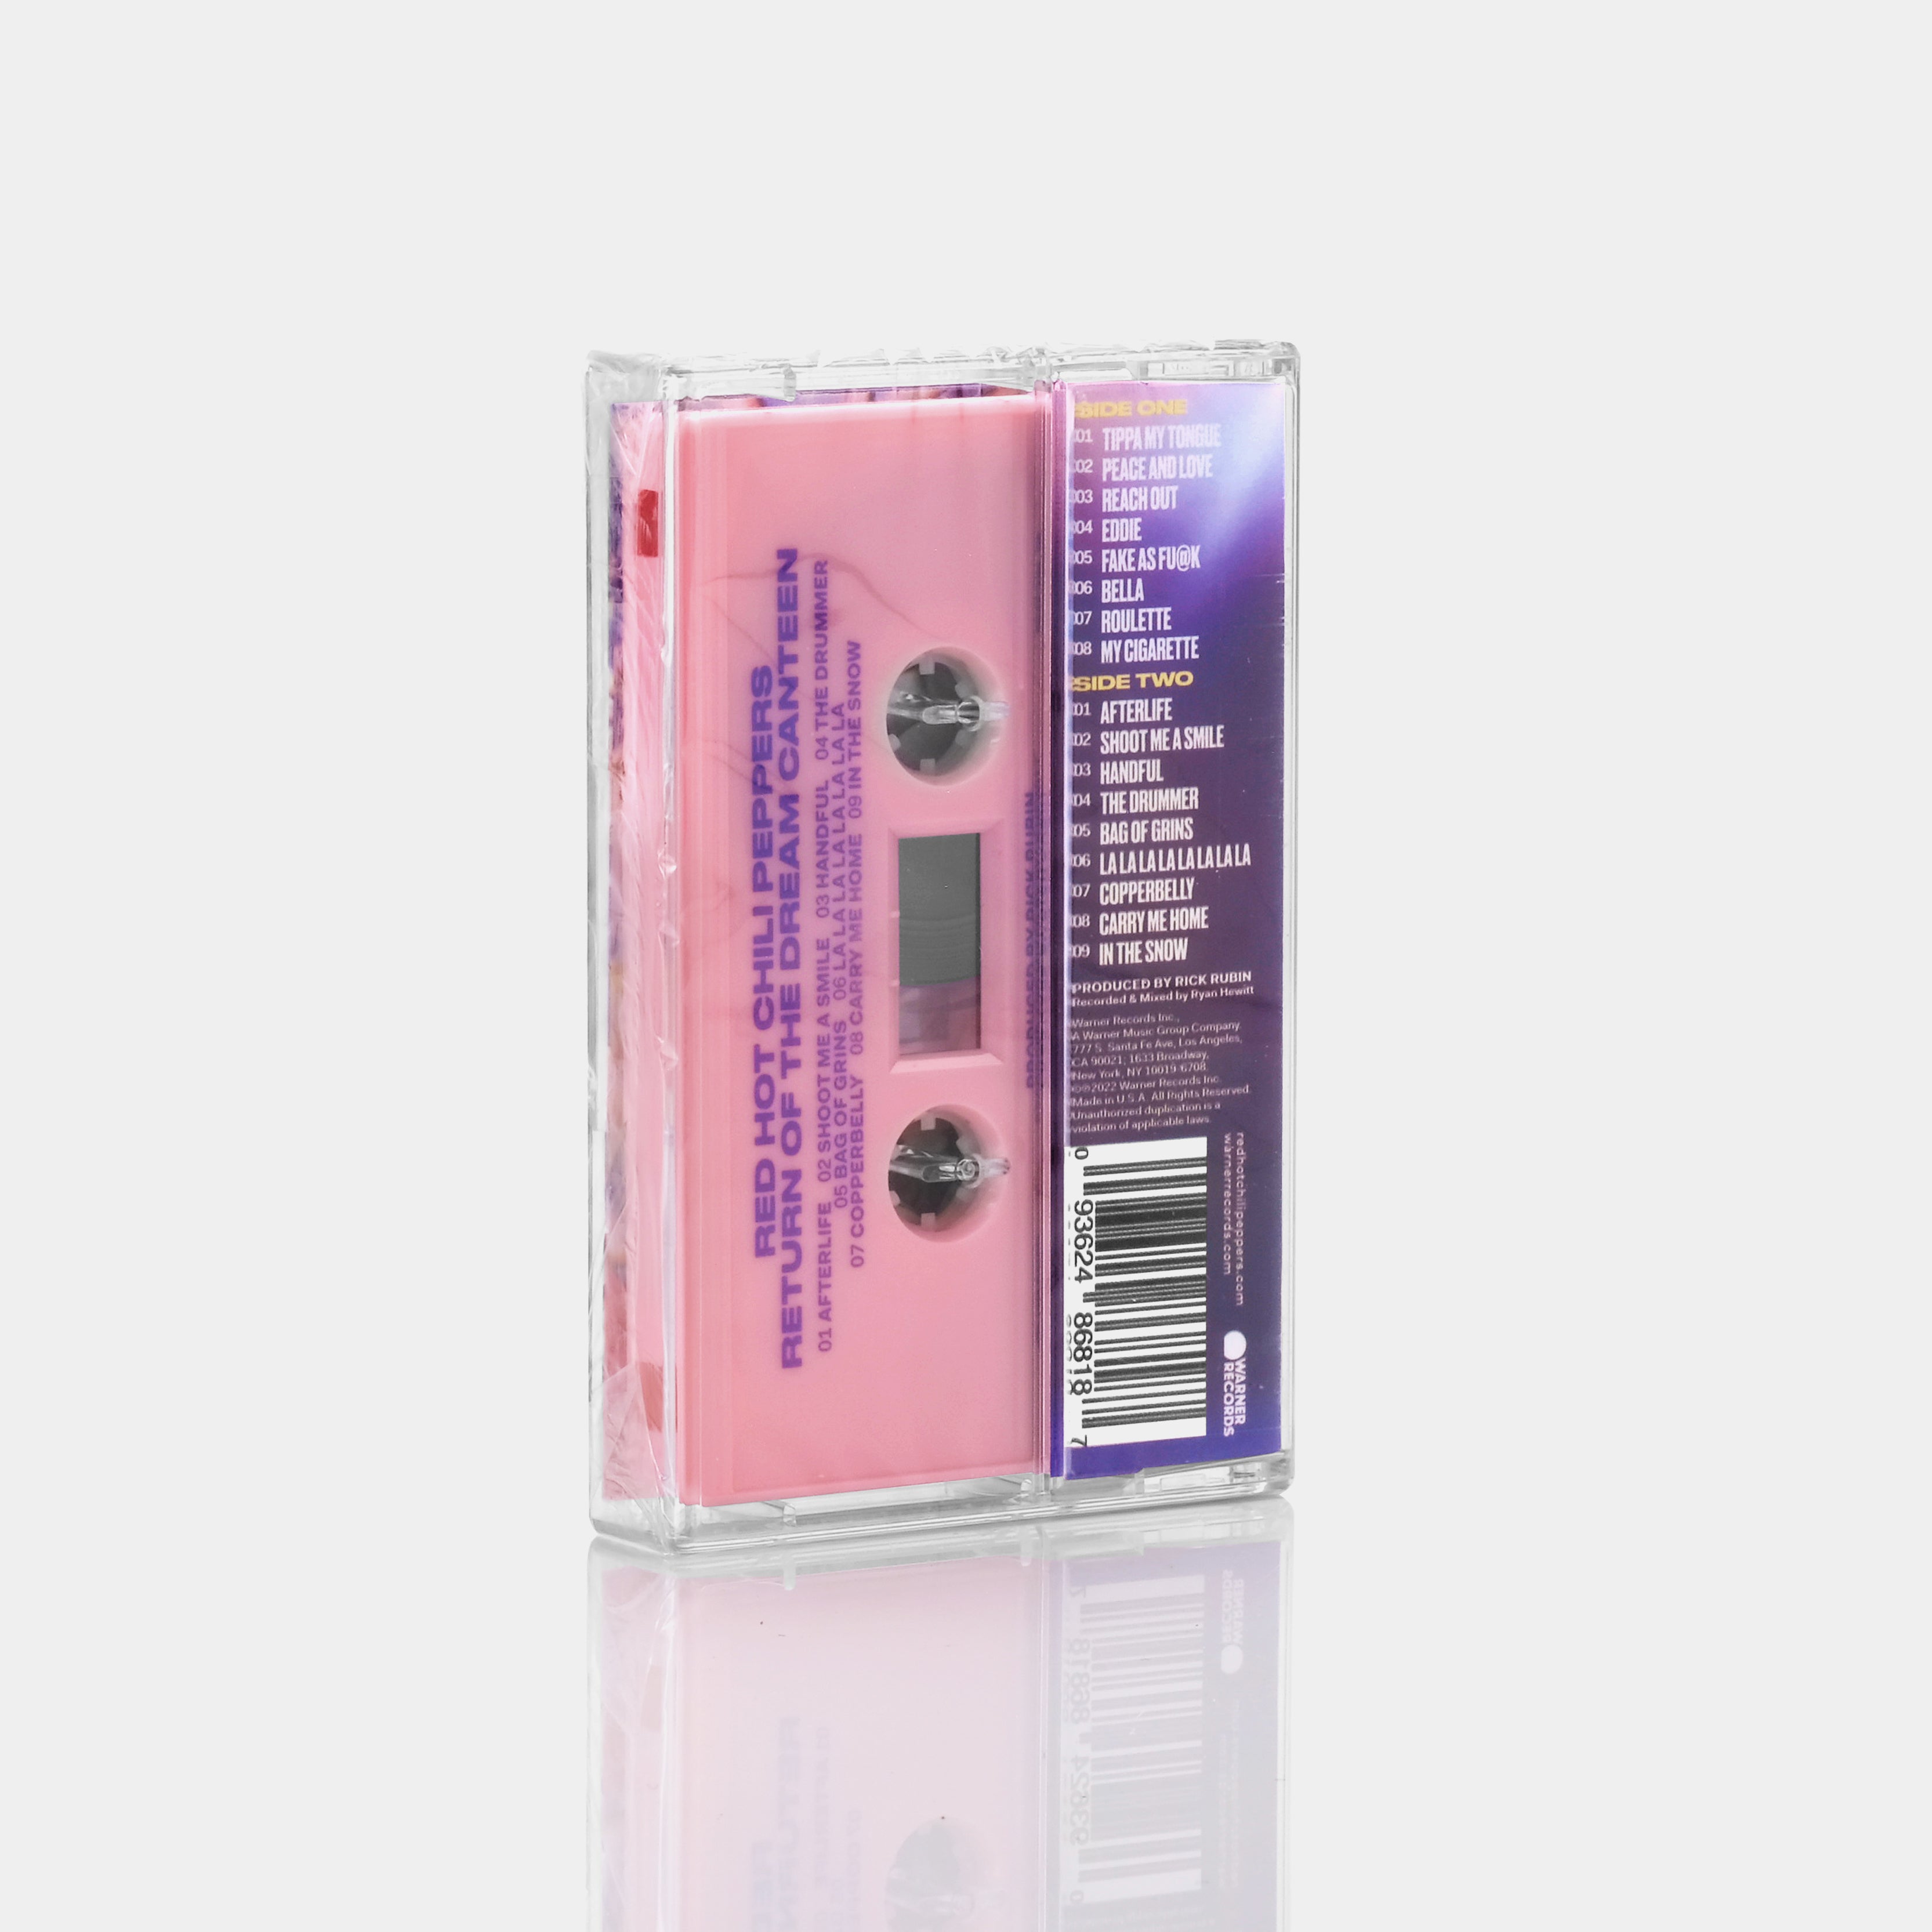 Red Hot Chili Peppers - Return Of The Dream Canteen Cassette Tape